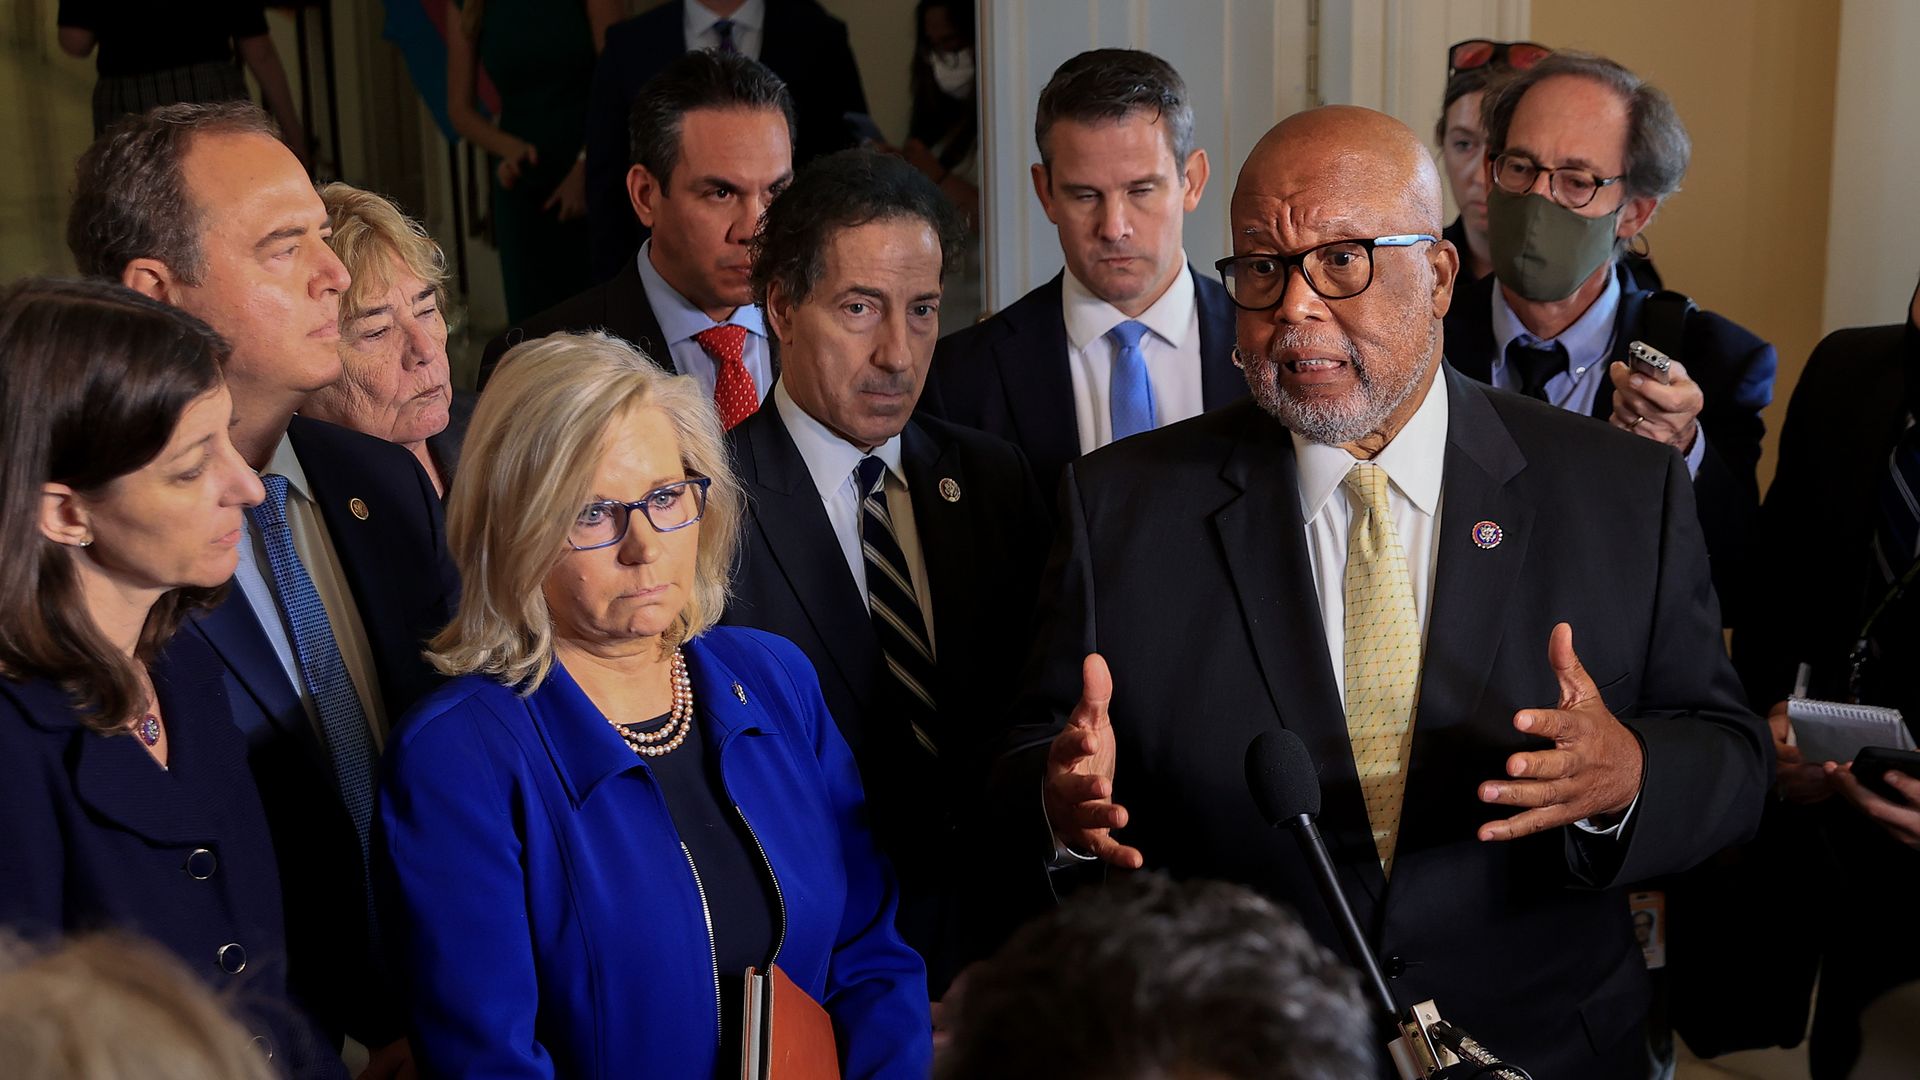 Chairman Rep. Bennie Thompson (D-MS) (R) and Rep. Liz Cheney (R-WY) (C), joined by fellow committee members, speak to the media.